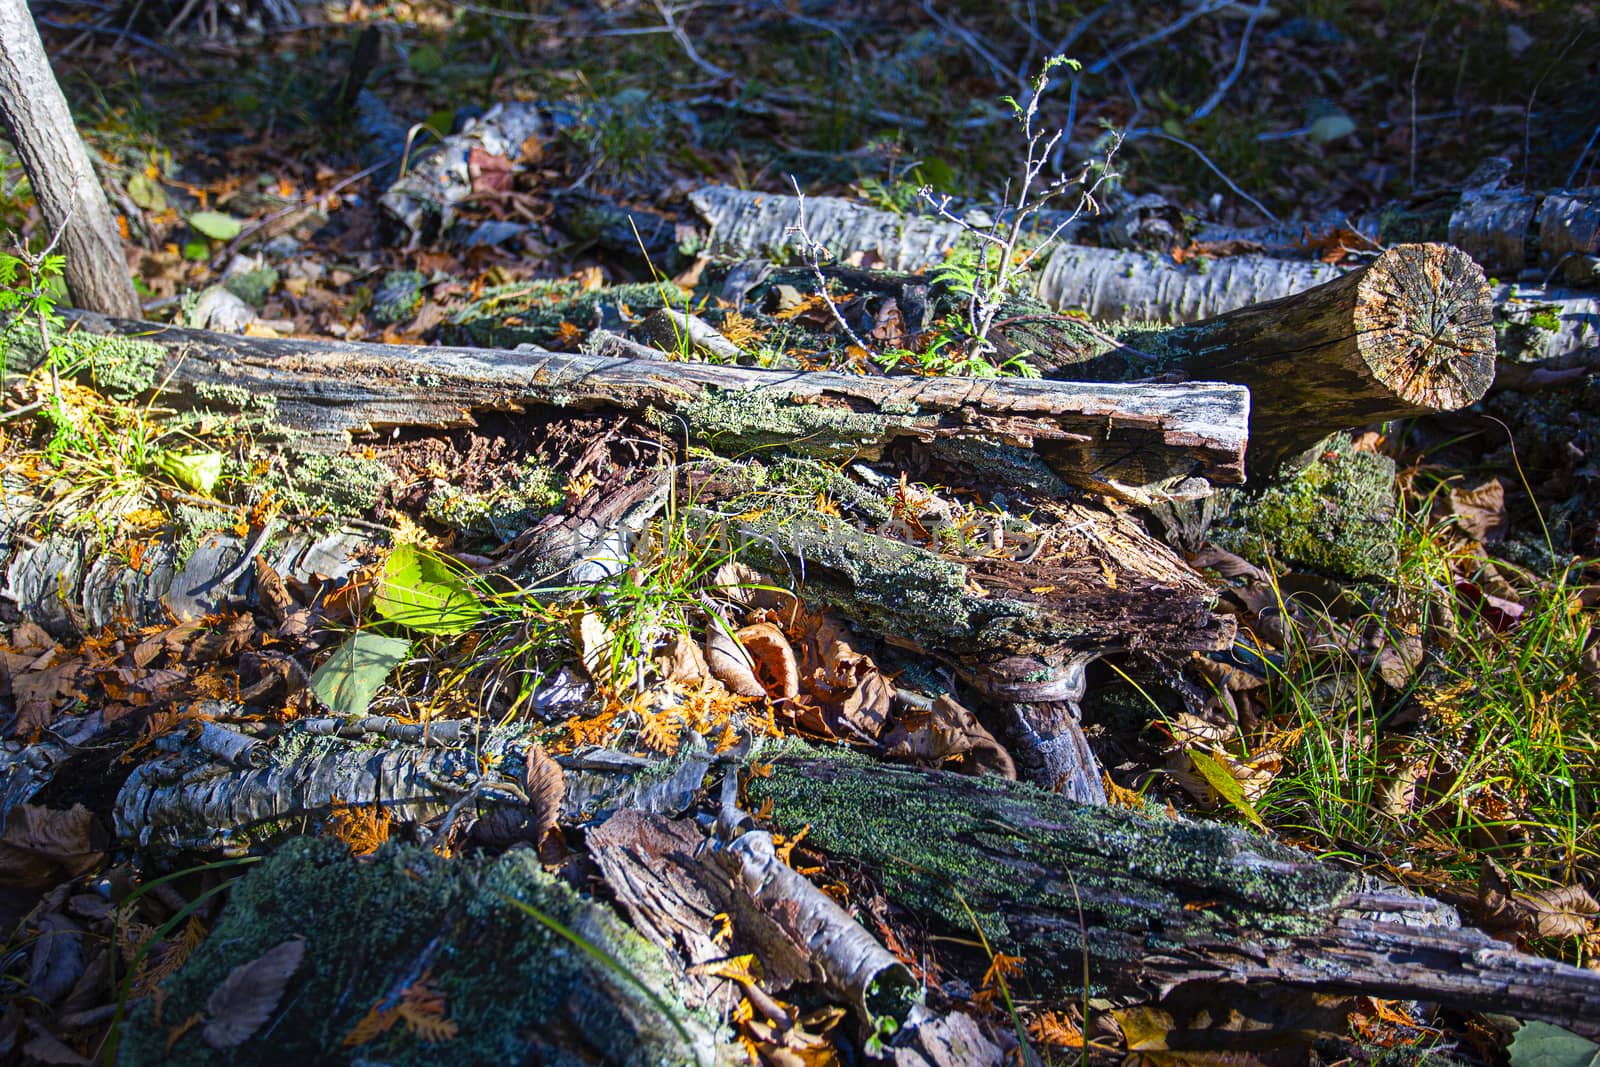 Broken tree trunk rotting away on the ground during the fall